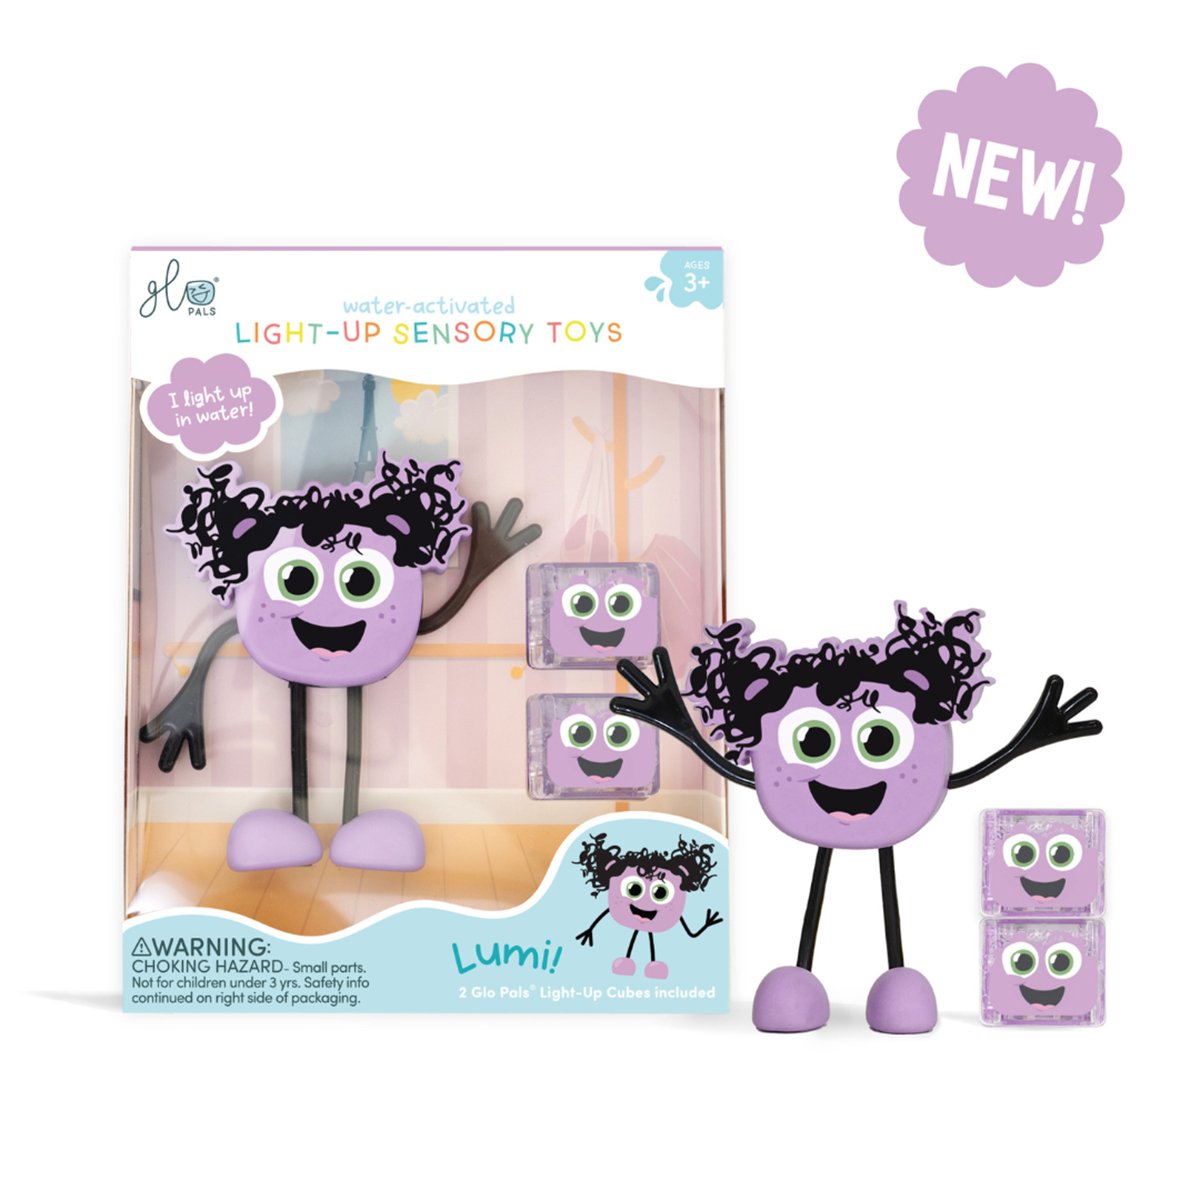 Glo Pals Character Purple | Glo Pals